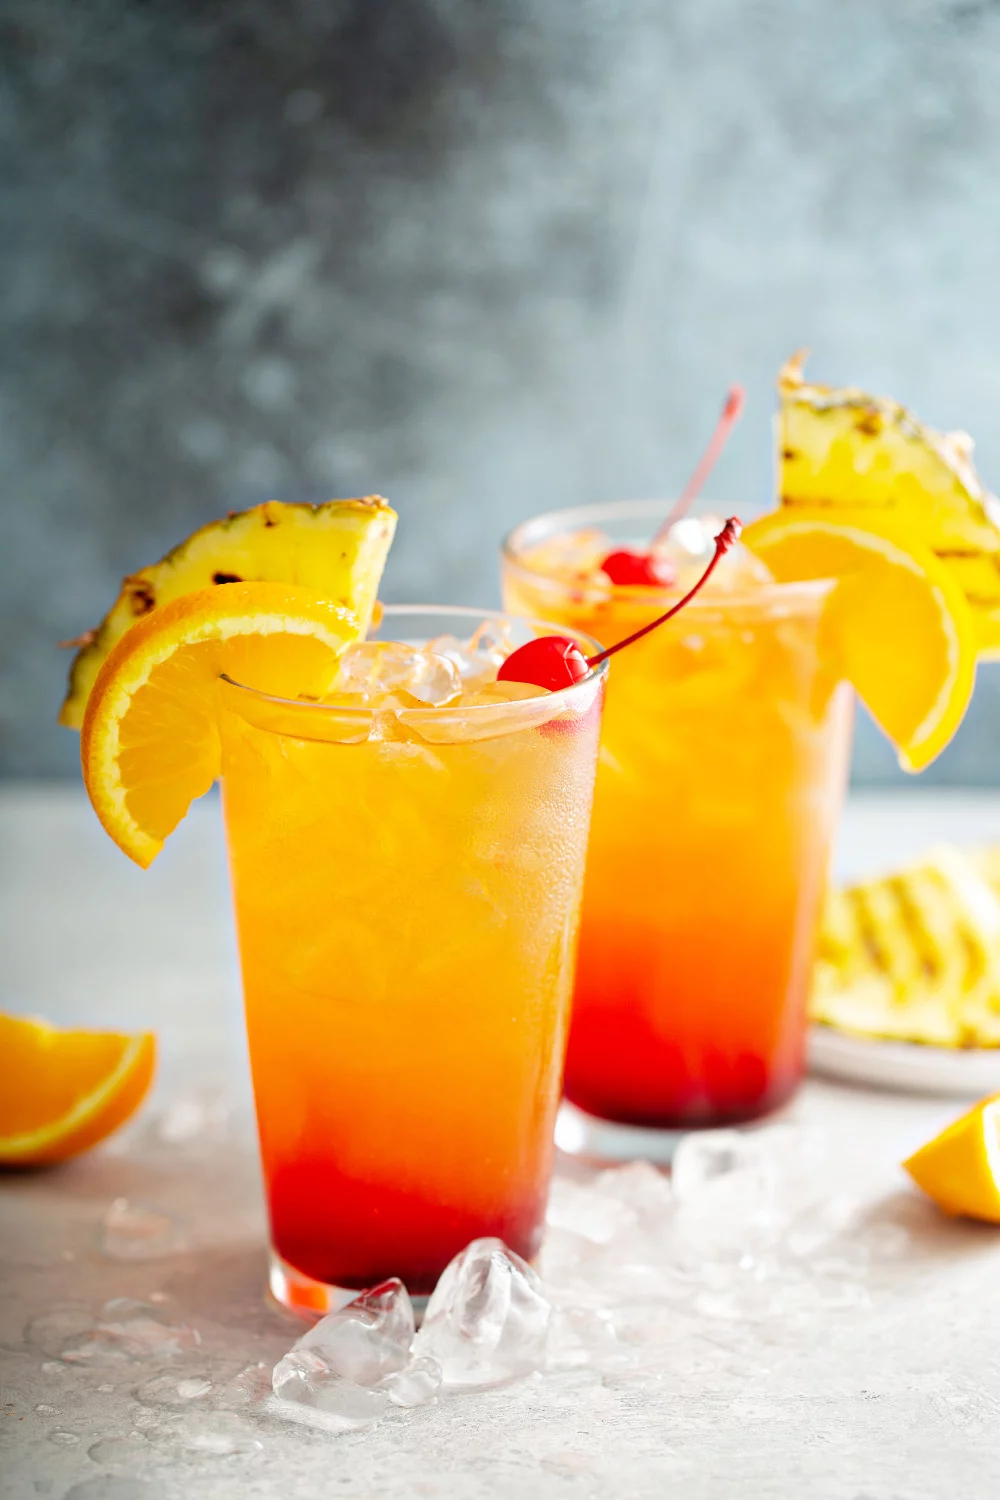 Tempting Tequila Sunrise | Cooking Clue